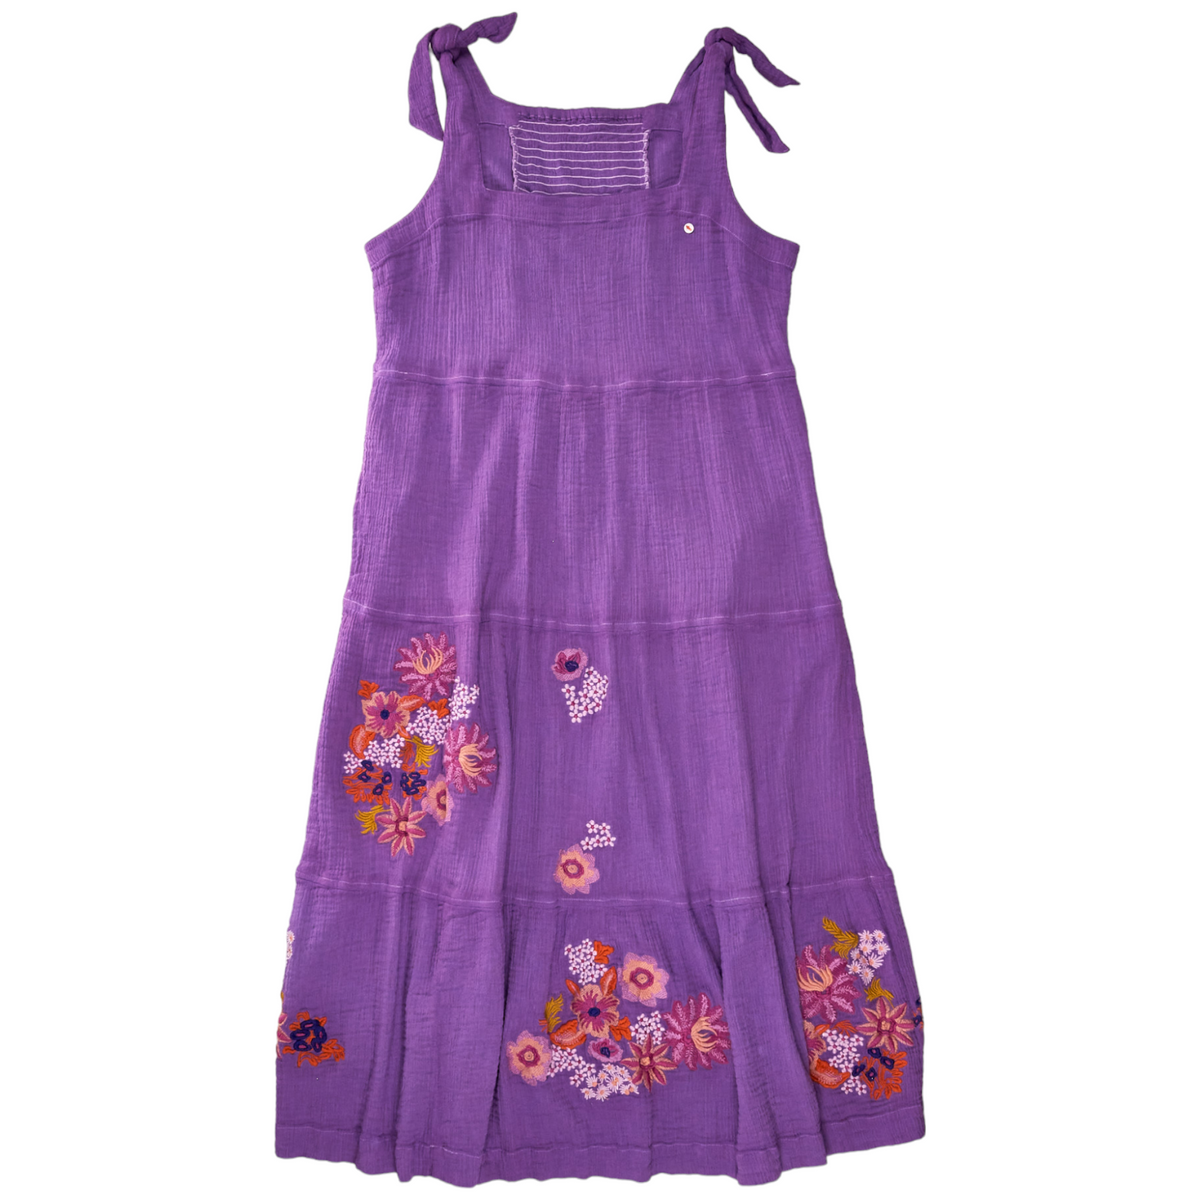 NRBY Purple Embroidered Sun Dress